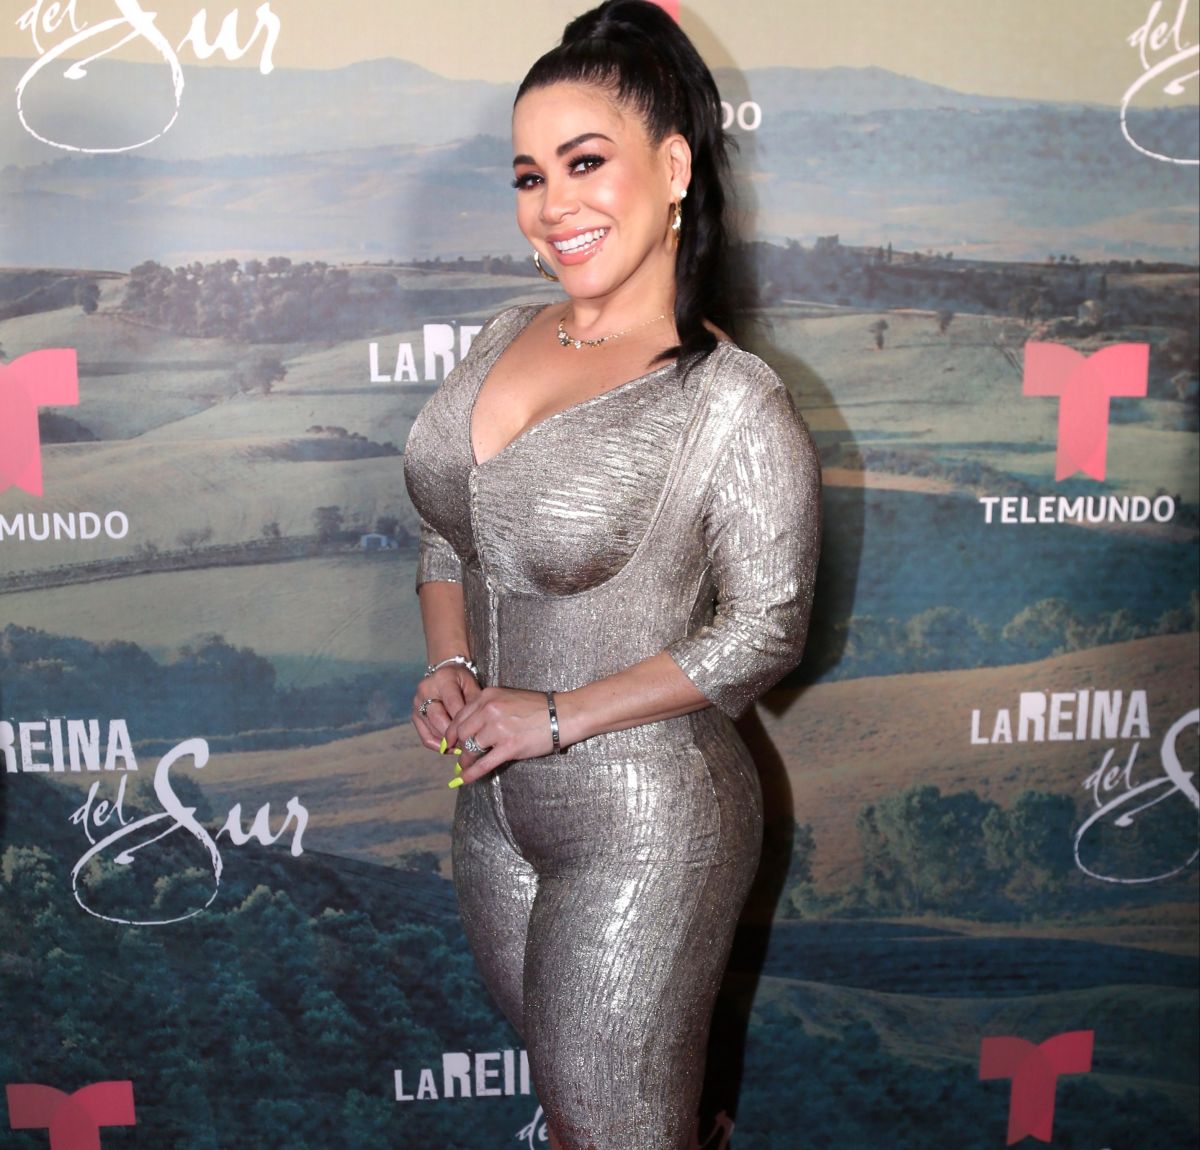 They called Carolina Sandoval ‘The queen of fat’ for wearing a super tight girdle and posting this ‘Live’ | The State